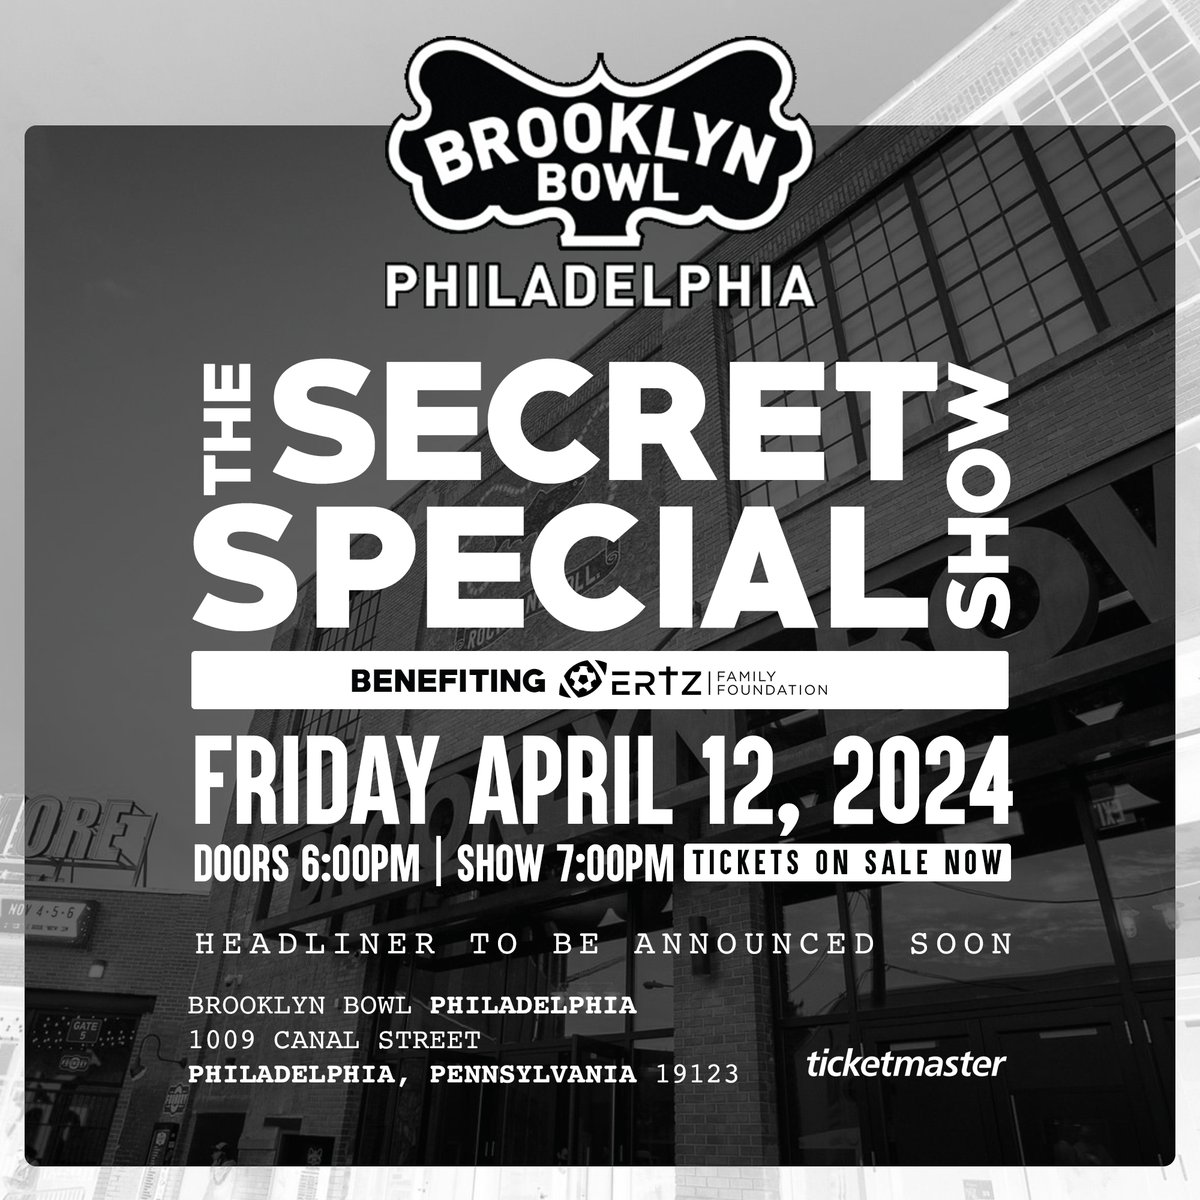 #PHILADELPHIA ✖️ Join us on FRIDAY, APRIL 12 at @BBowlPhilly for THE SECRET 🤫 SPECIAL SHOW benefiting our foundation. Headliner and special guests to be announced soon ✌🏼 Get tickets now at: ow.ly/rlNx50R56zP